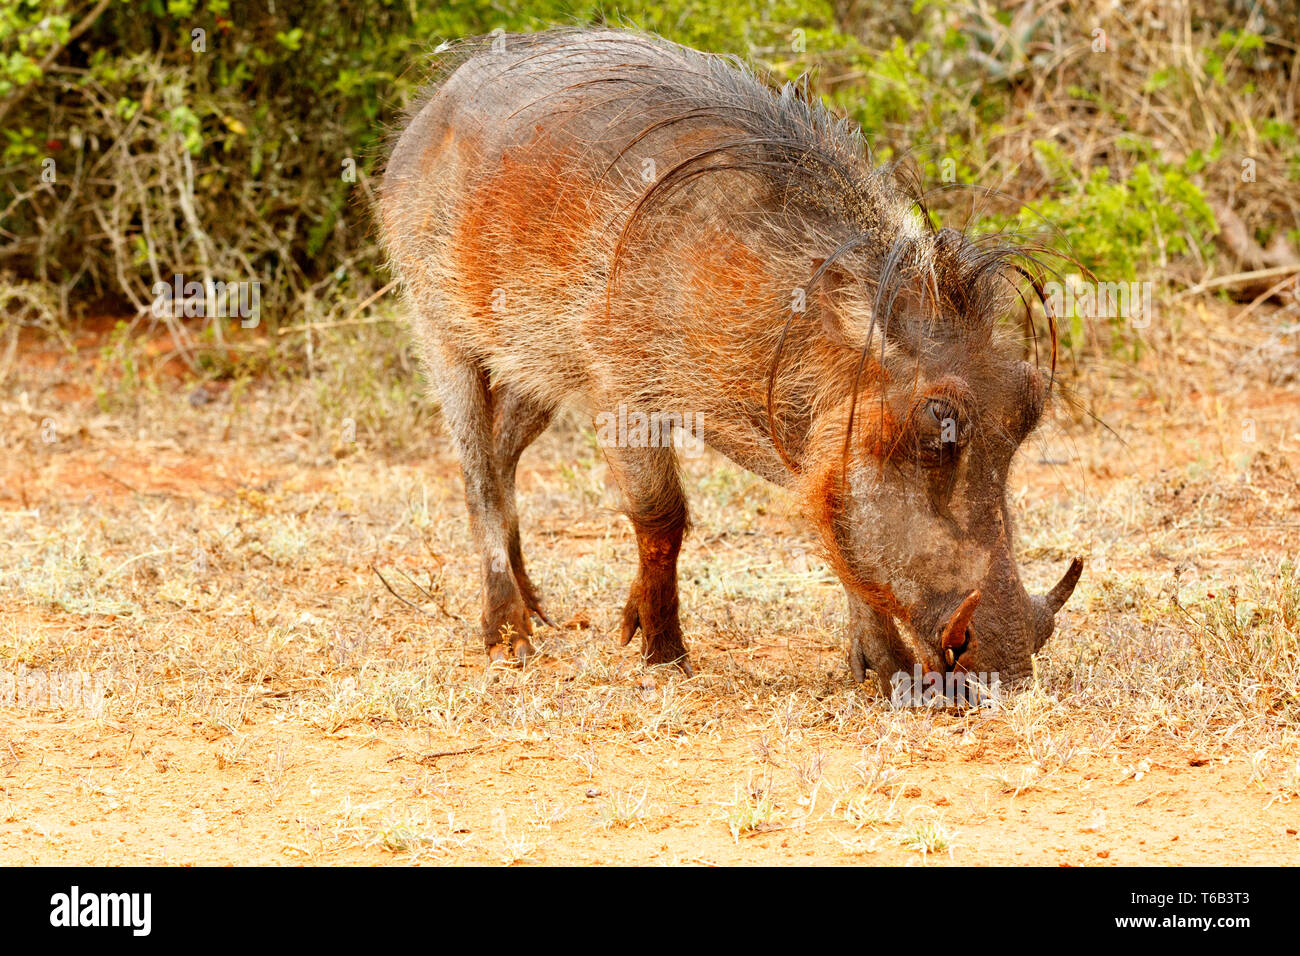 Side view of a common warthog eating grass Stock Photo